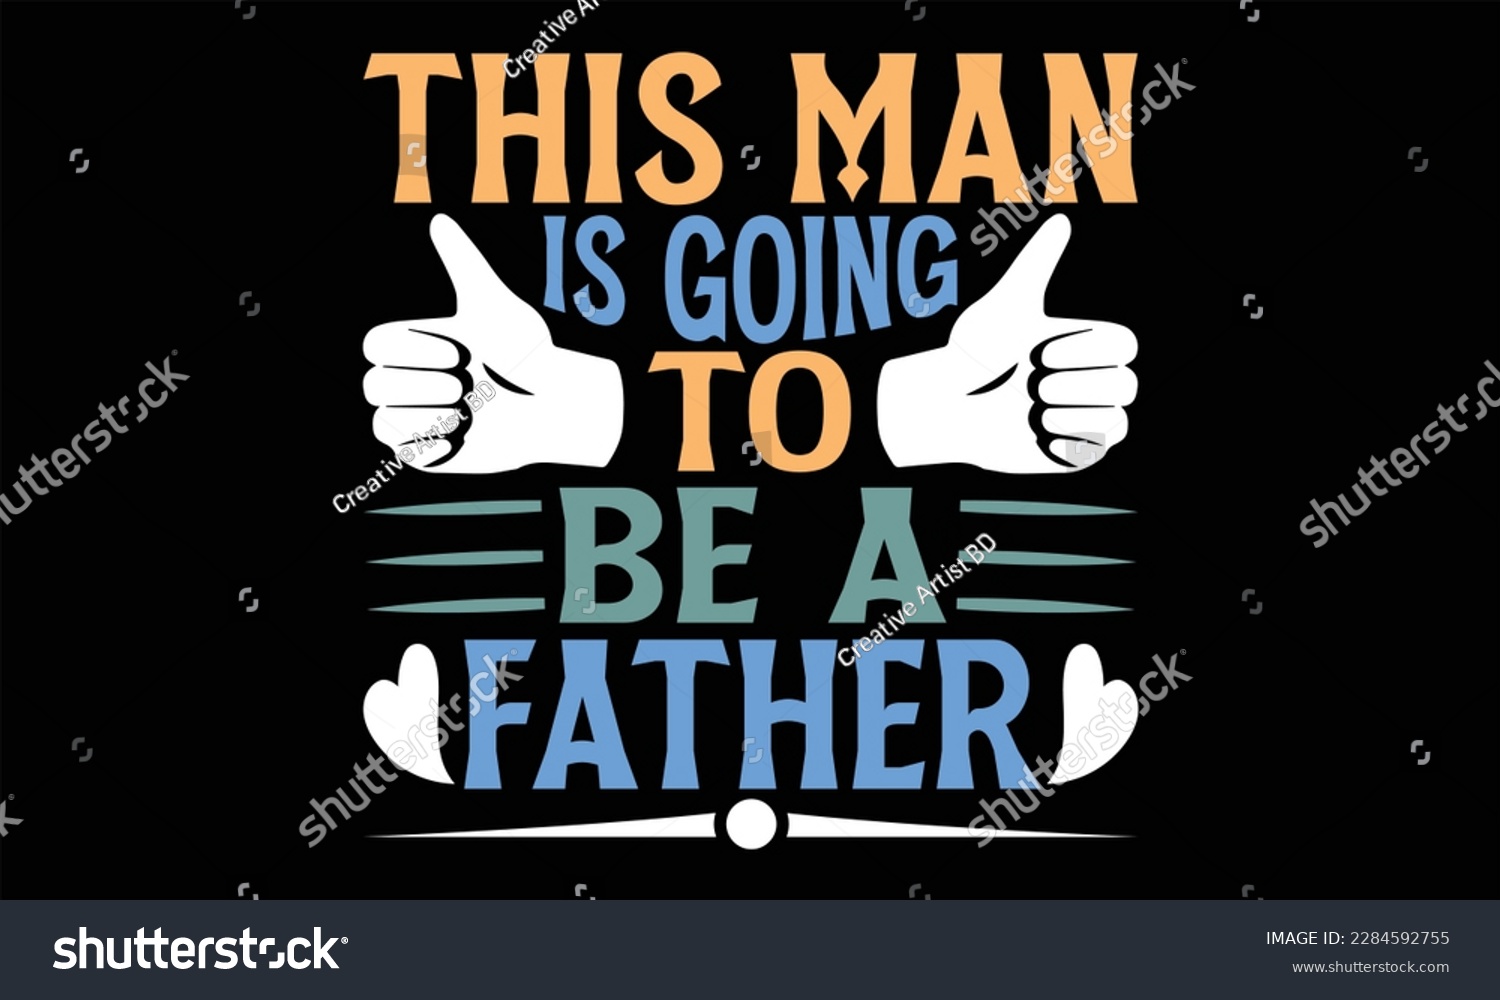 SVG of This Man Is Going To Be A Father - Father's Day SVG Design, Hand lettering inspirational quotes isolated on black background, used for prints on bags, poster, banner, flyer and mug, pillows. svg